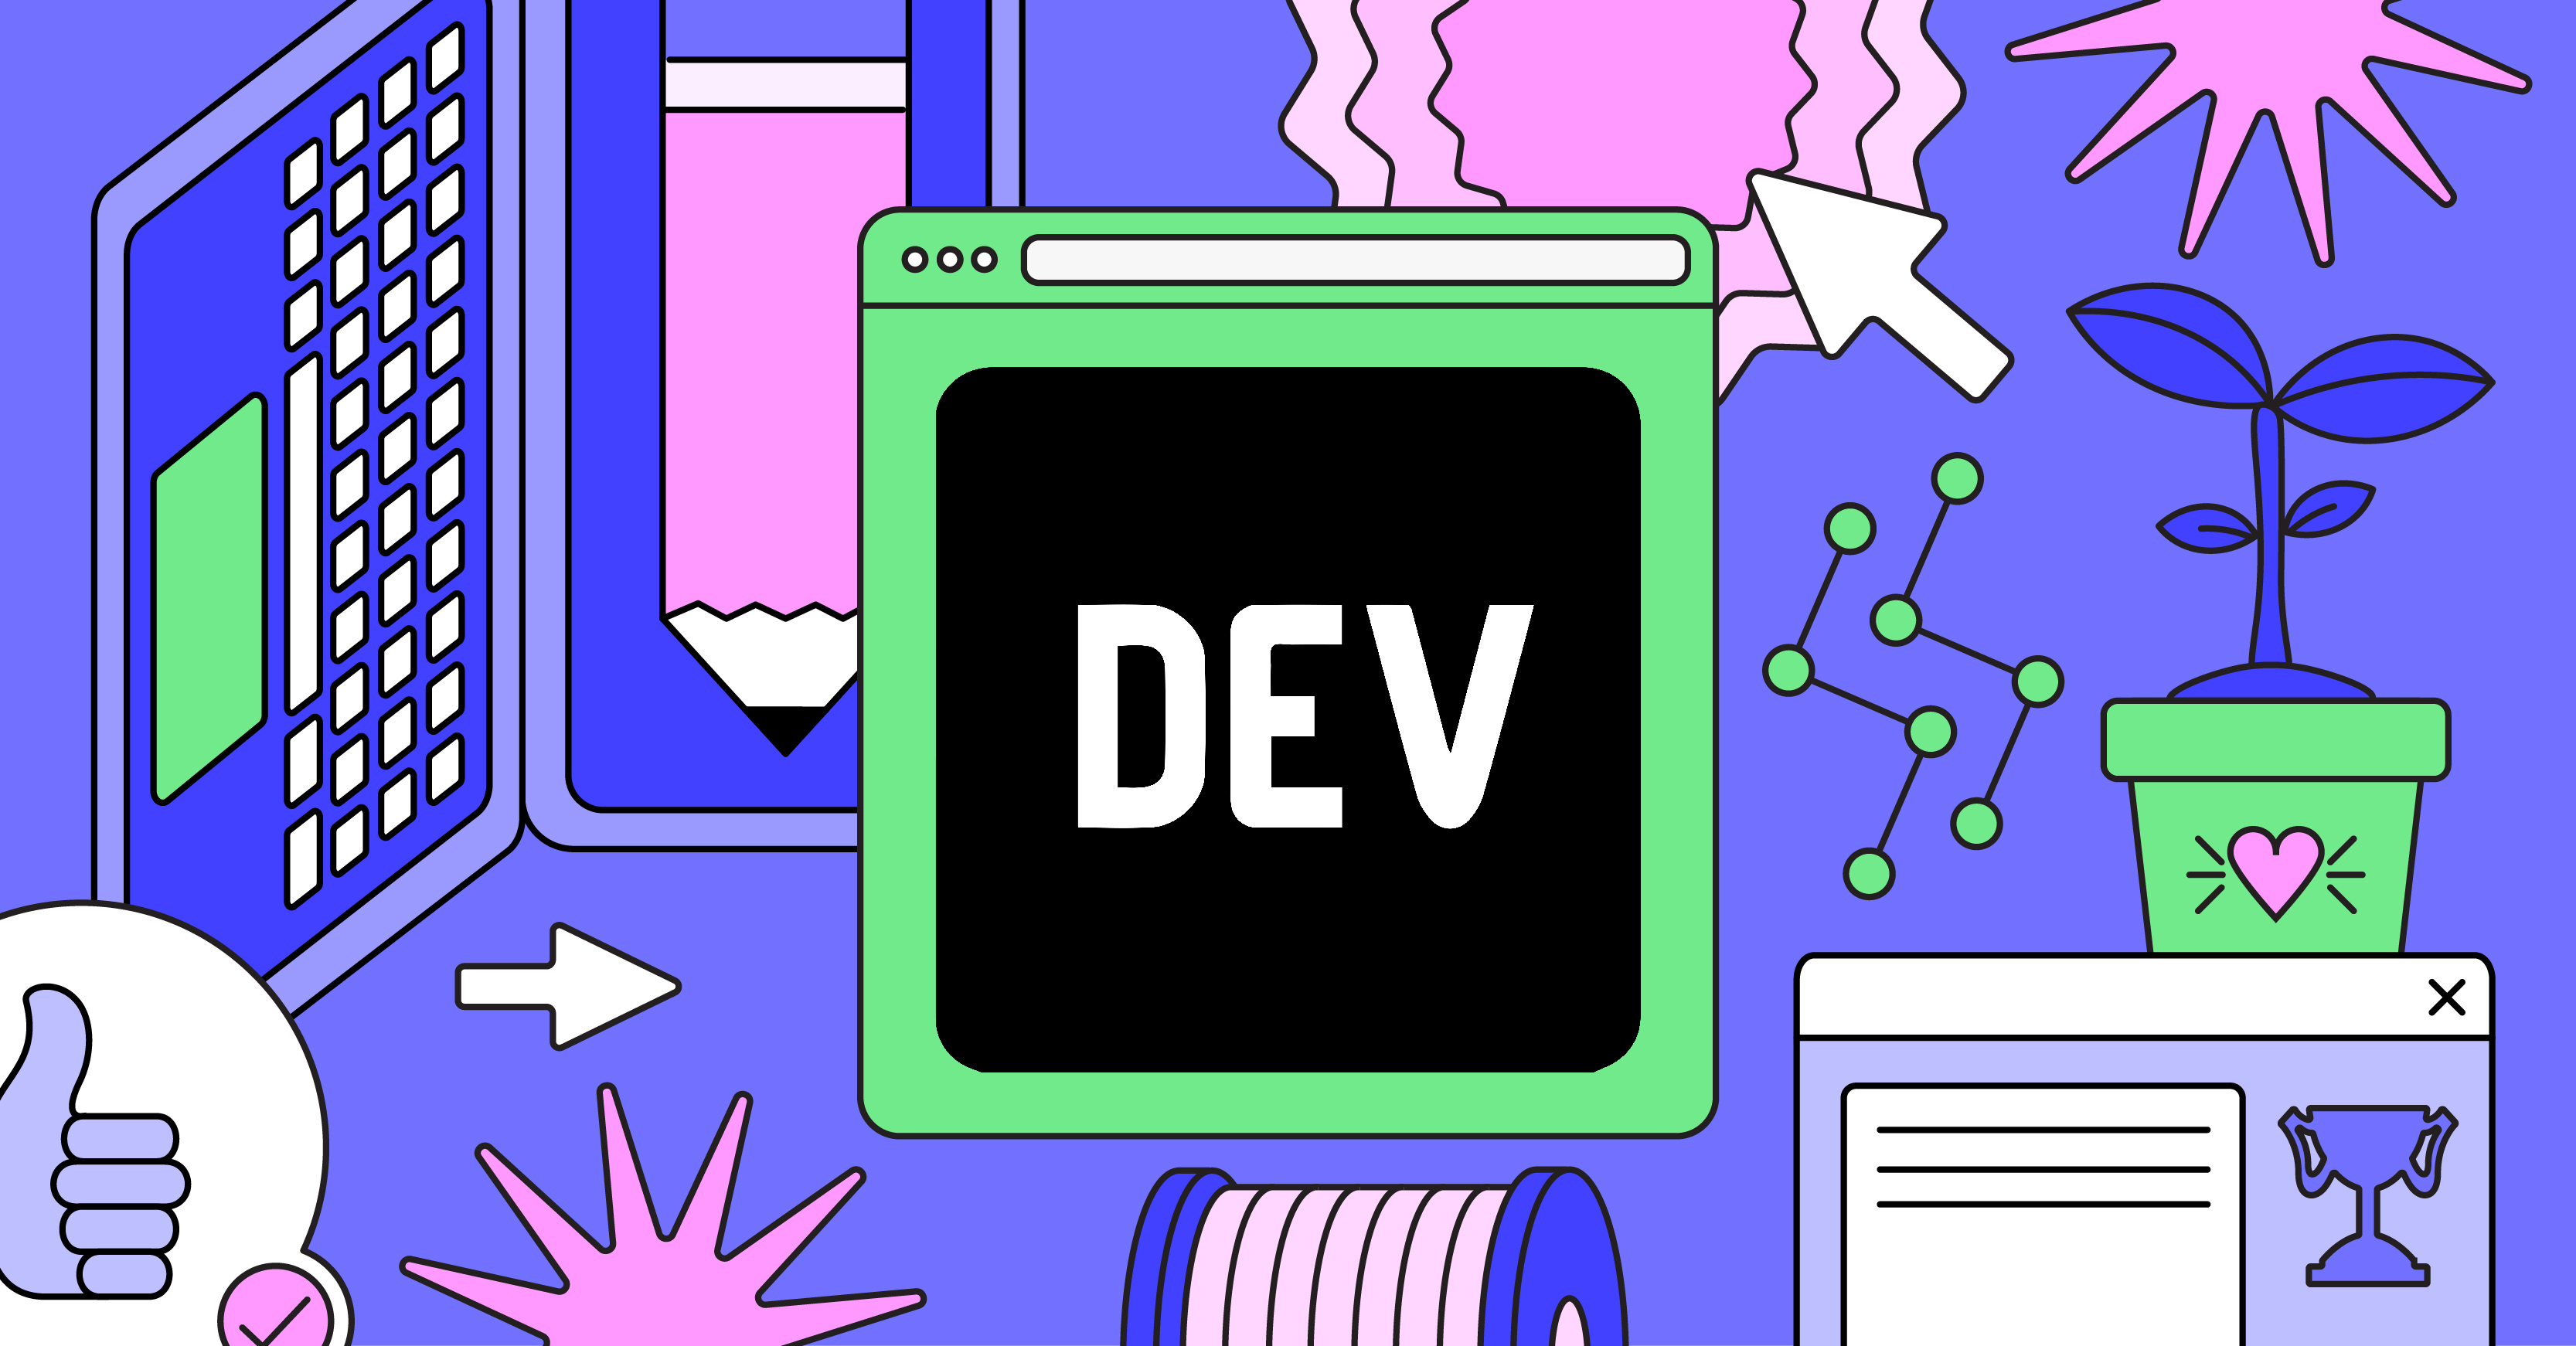 Learn to become a modern frontend developer - DEV Community 👩‍💻👨‍💻